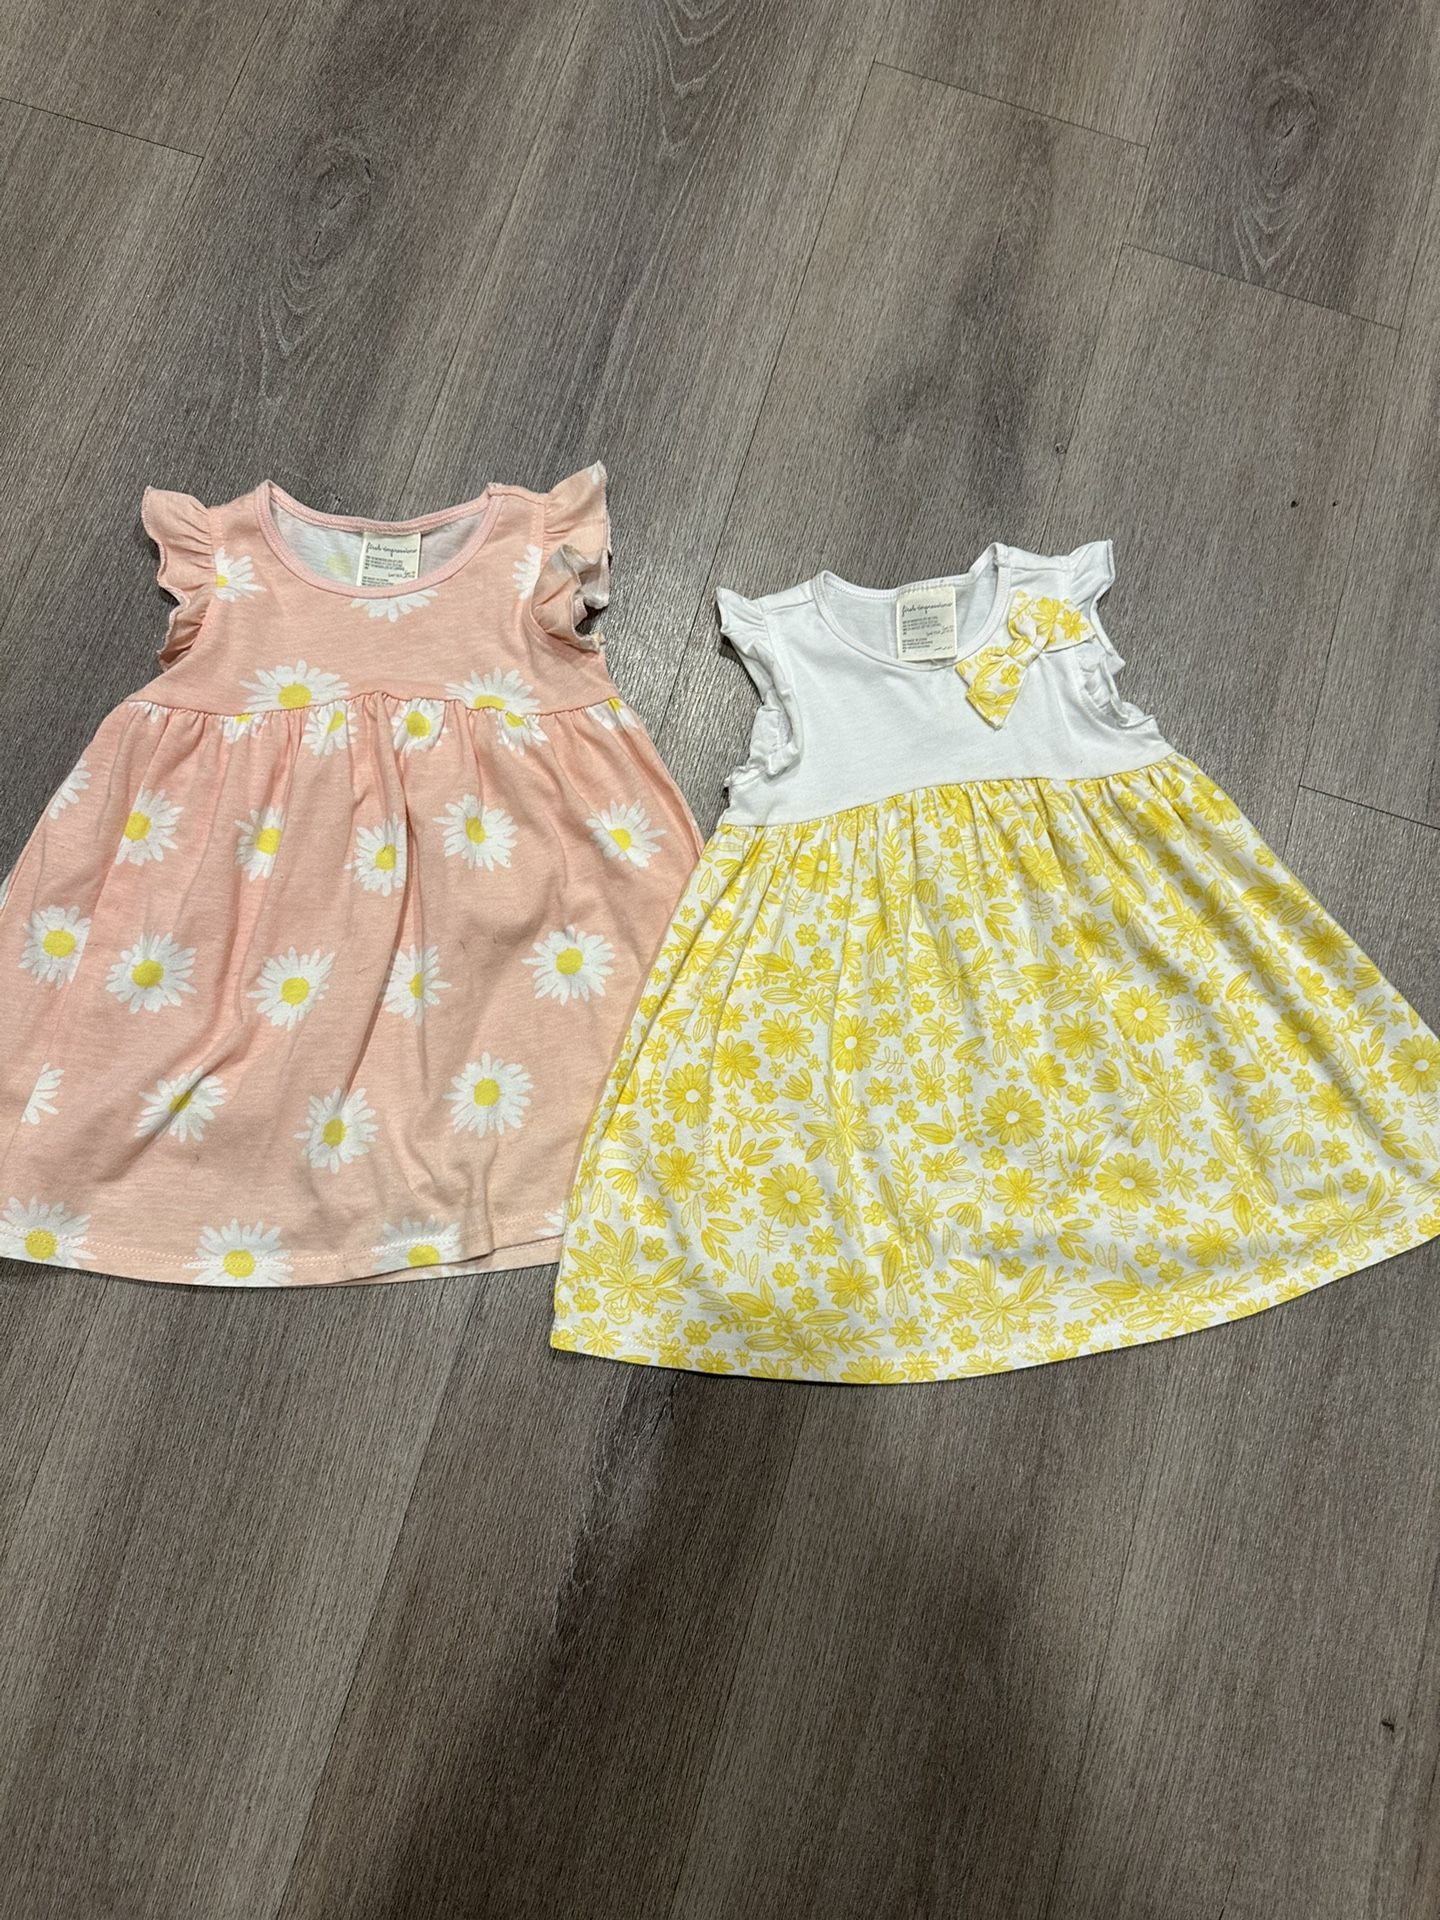 2 baby girl dresses first Impressions brand